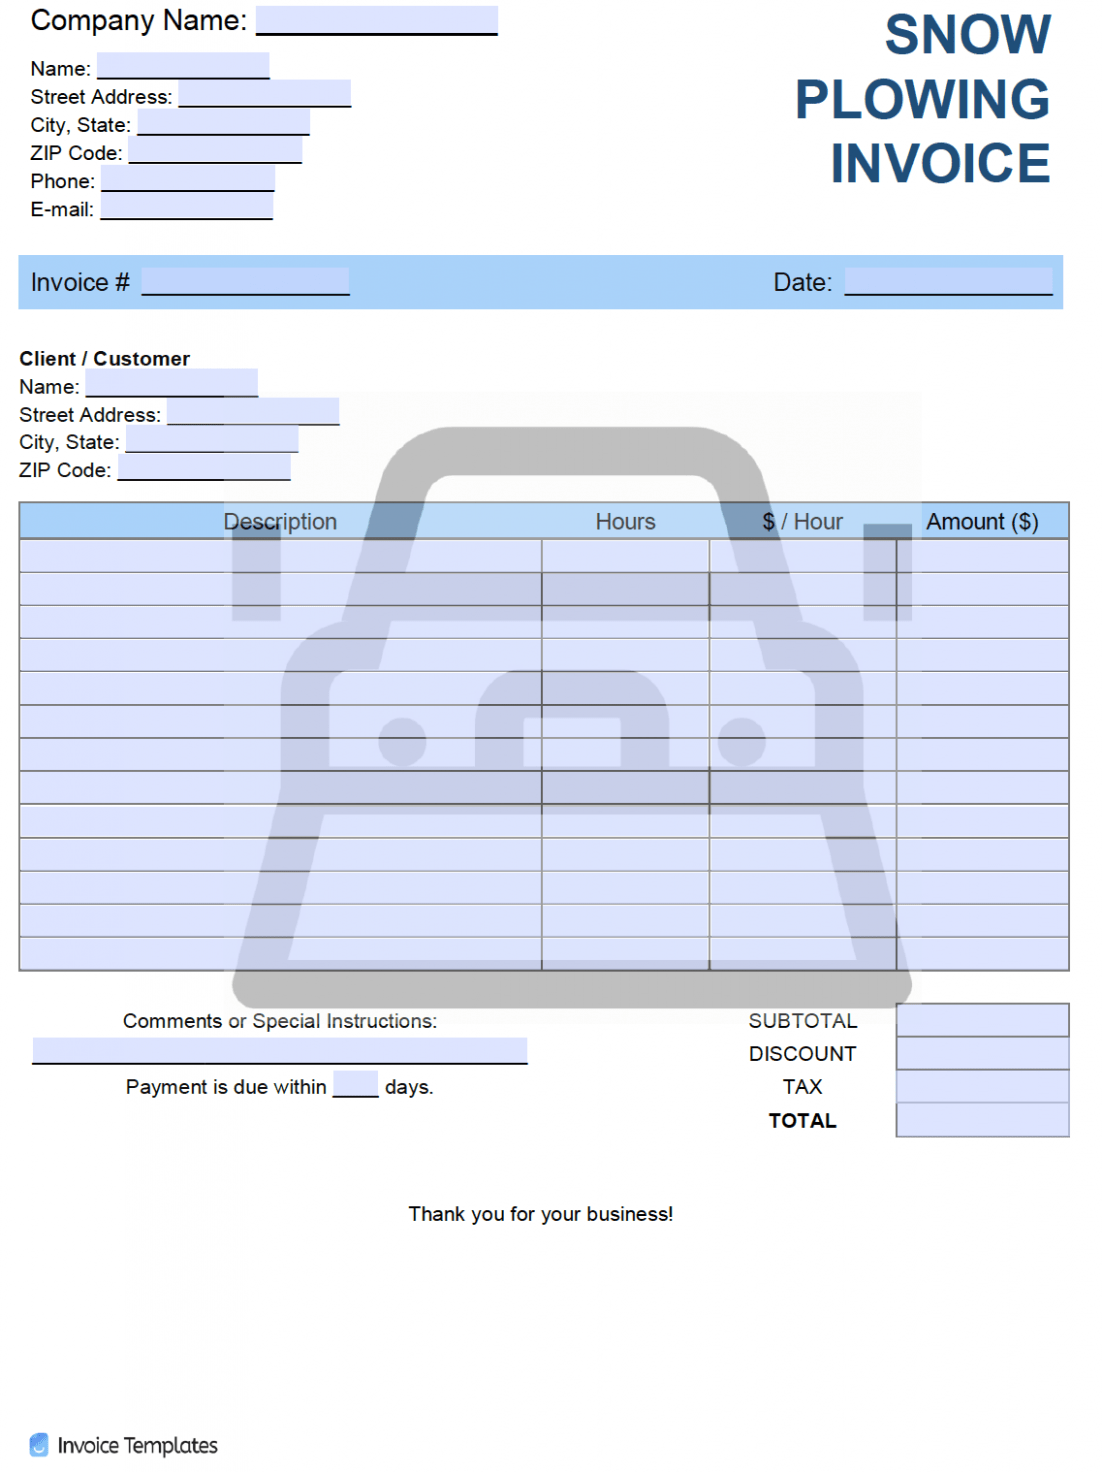 Printable Snow Plowing Invoice Template Word